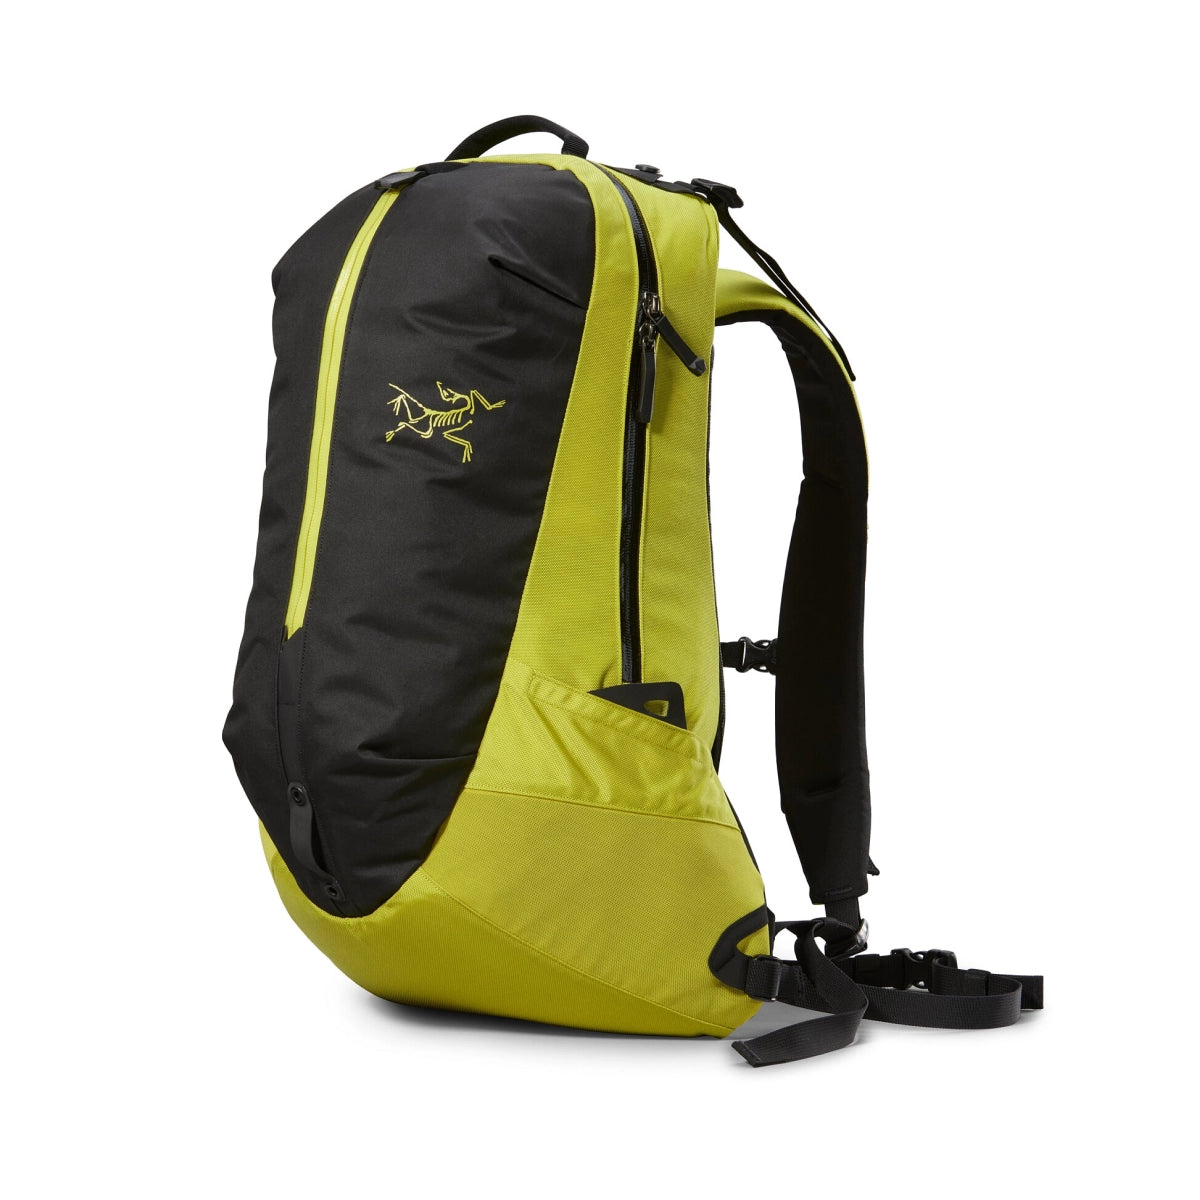 Arro 22 Backpack - ARC'TERYX(アークテリクス) | iGATE IKEUCHI EXIT online store